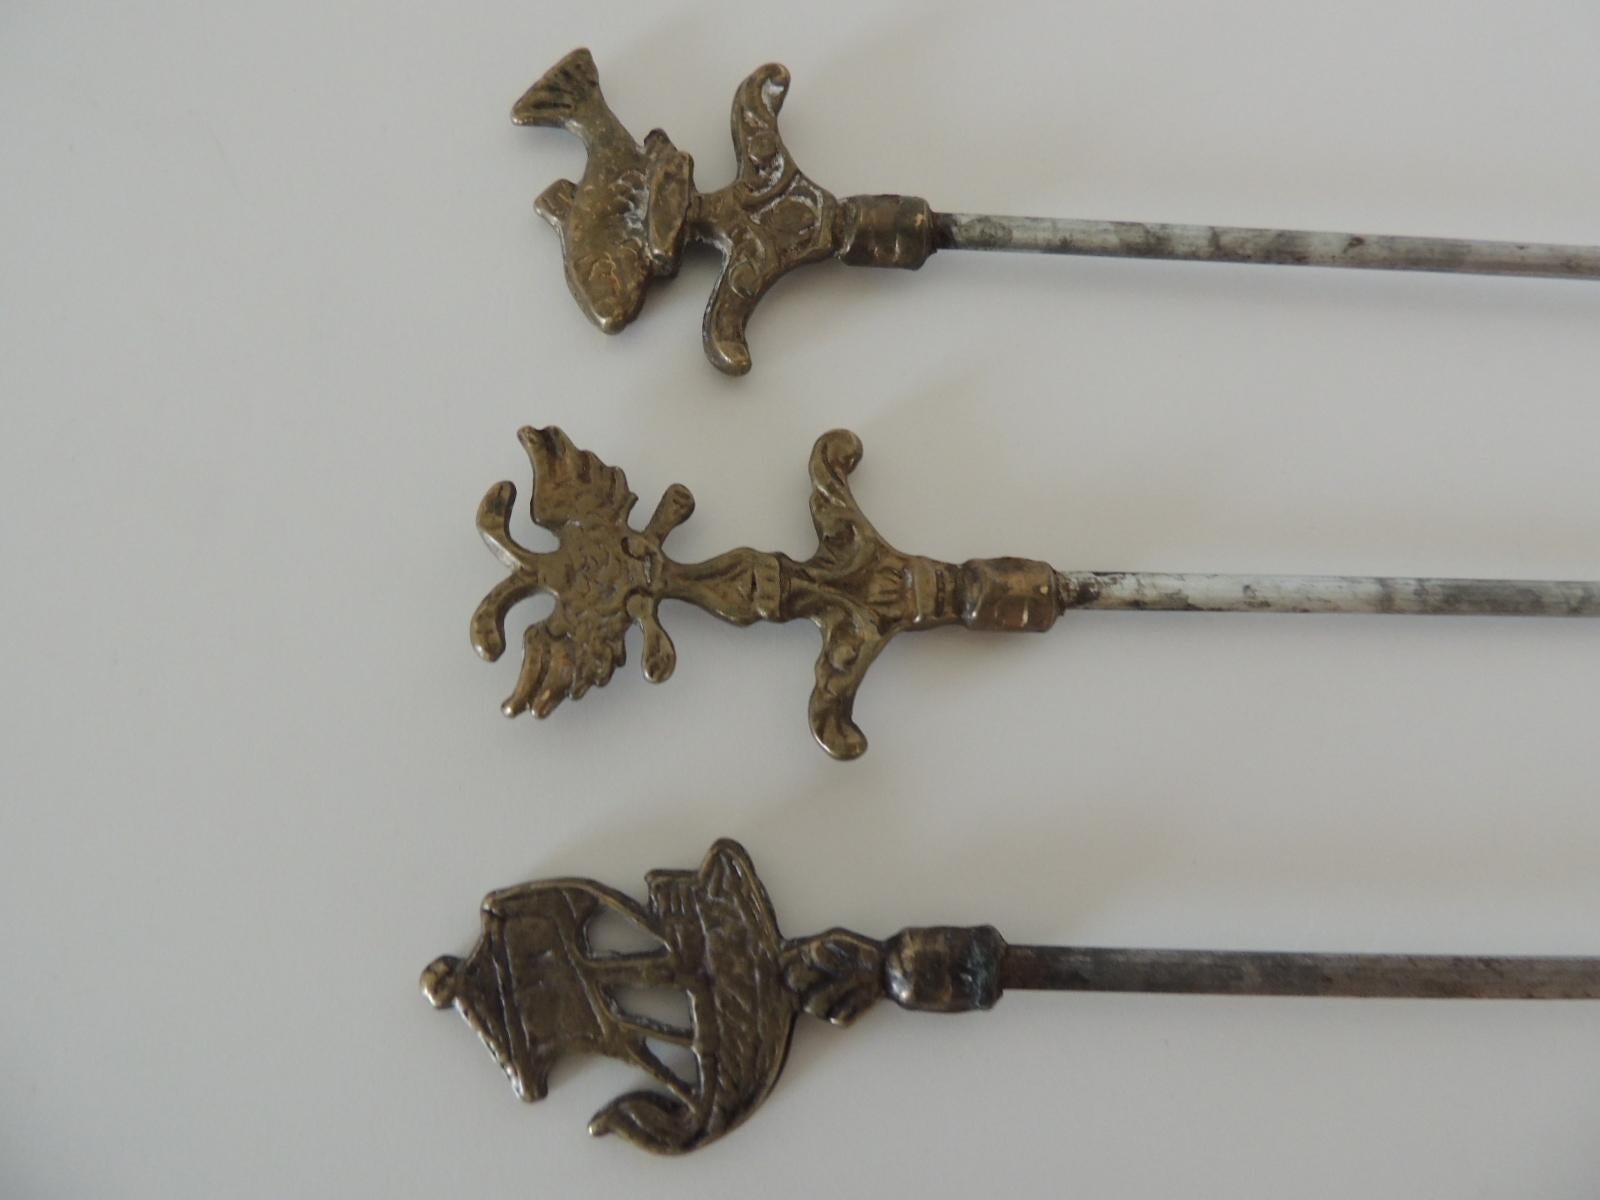 Brass set of (6) Grilling Skewers.
Depicting animals, fish and boat.
Size: 1